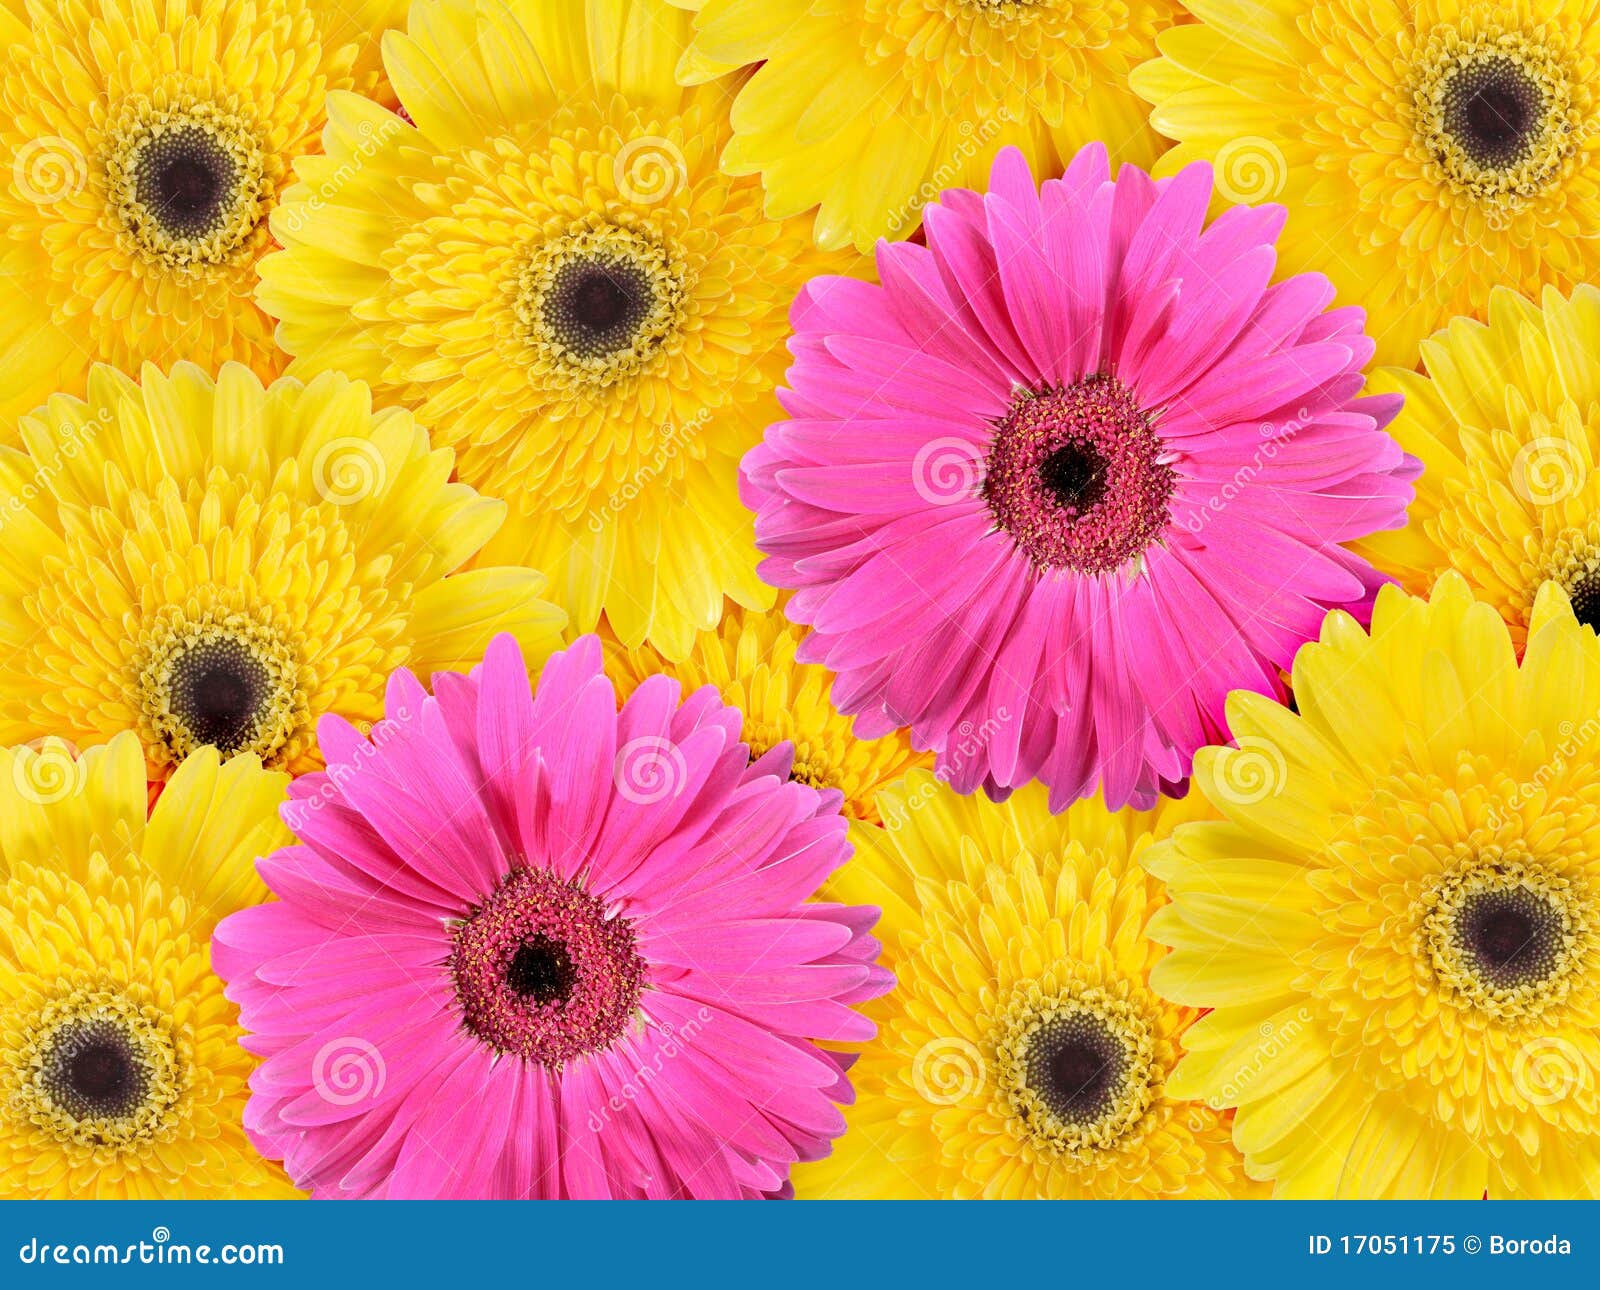 Abstract Background Of Yellow And Pink Flowers Stock Image ...
